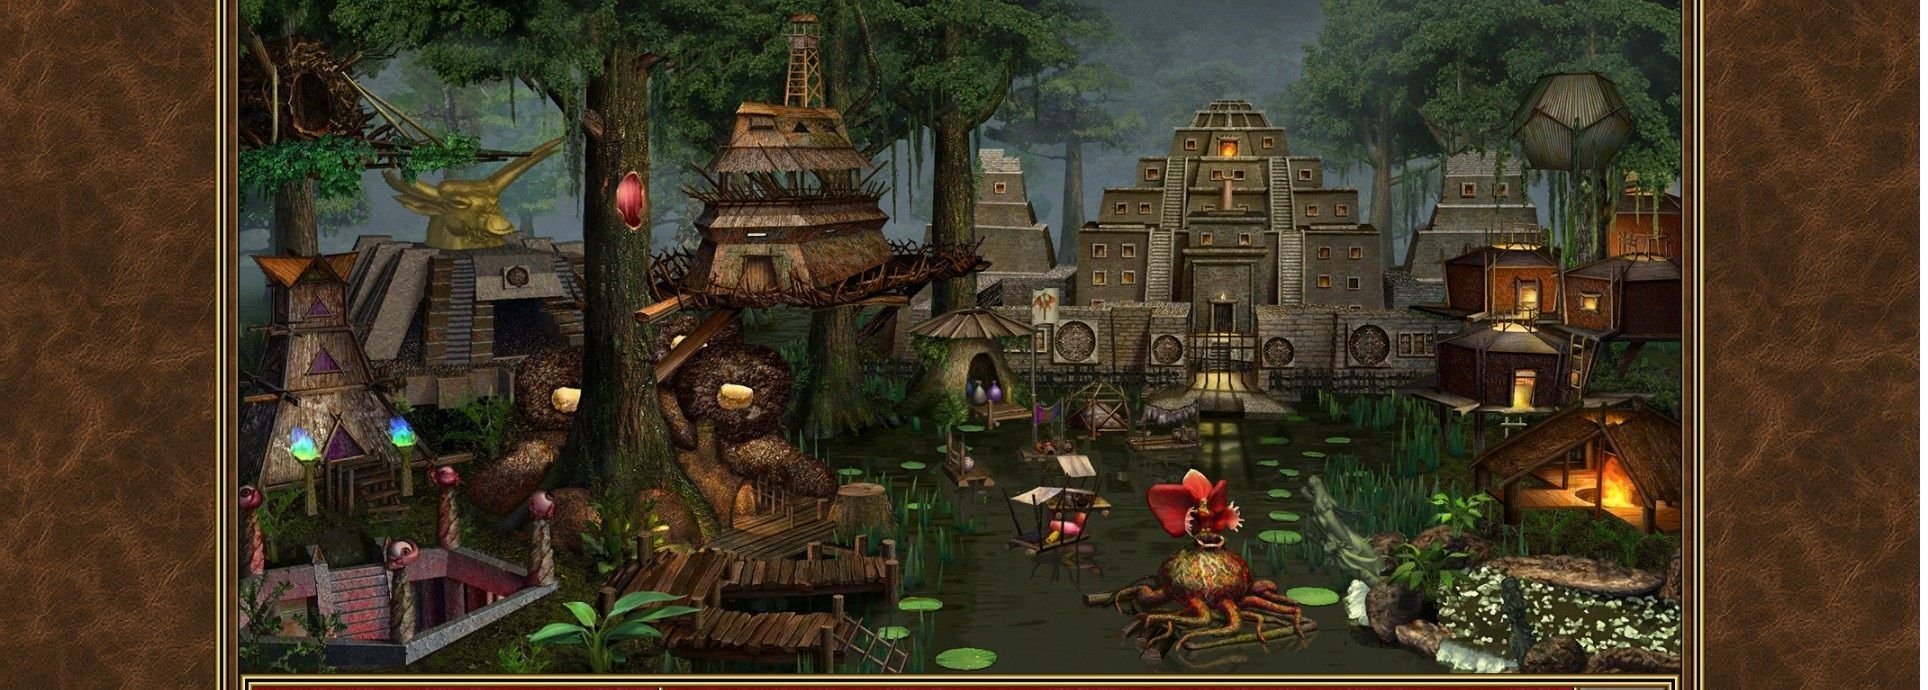 Grafika z gry Heroes of Might and Magic 3.